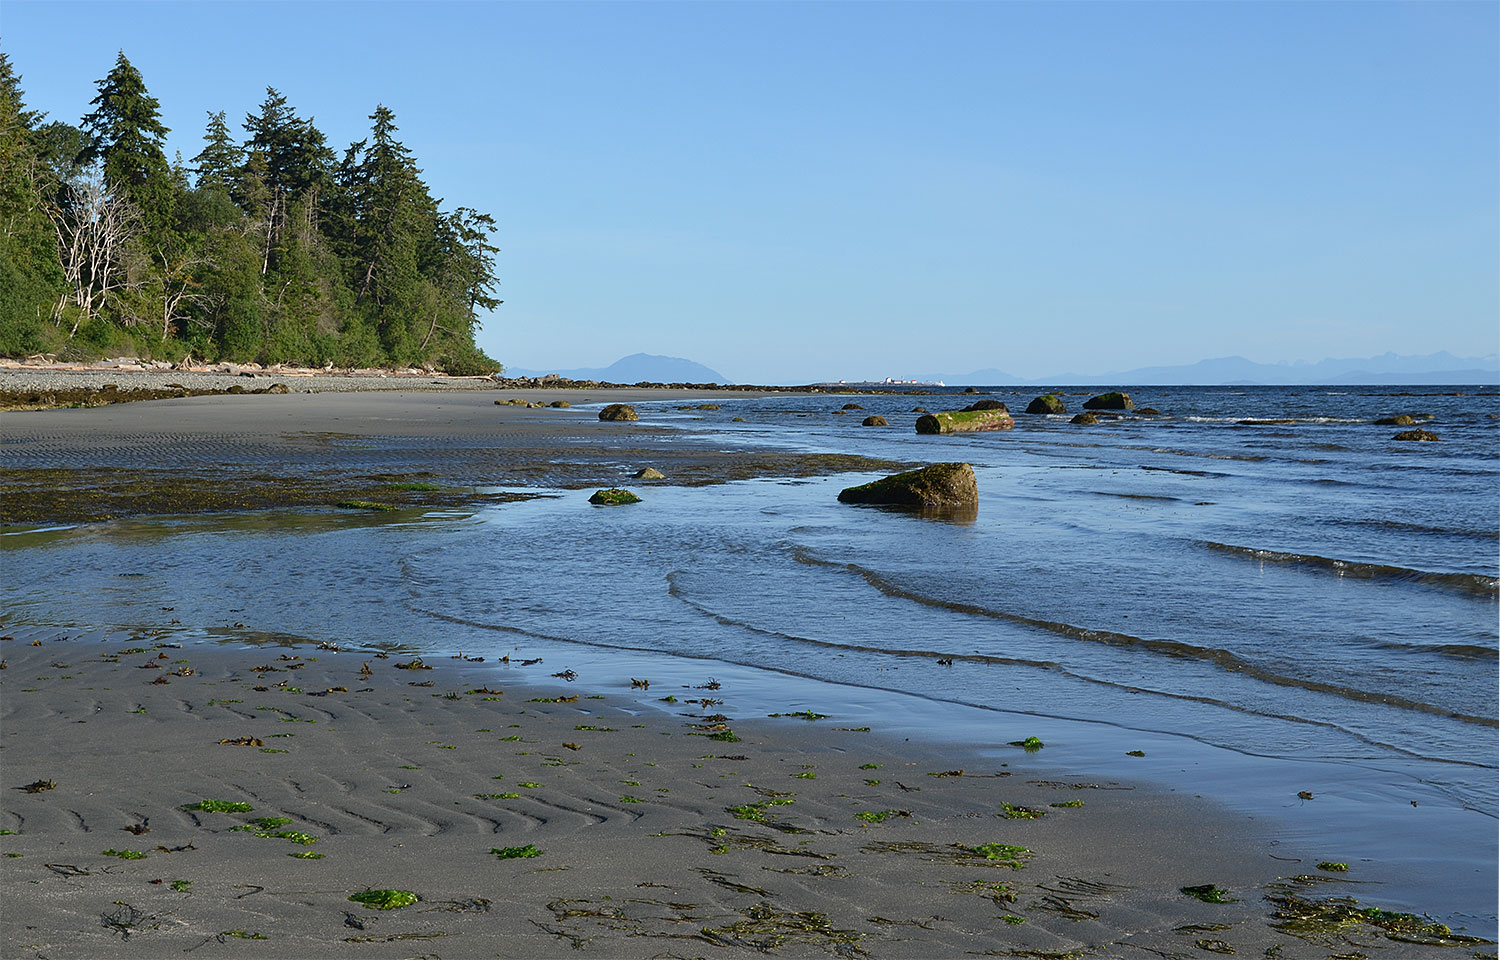 Looking along a sandy beach interspersed with rocks at low tide, forest behind. In the distance you can faintly see the silhouette of the lower mainland.